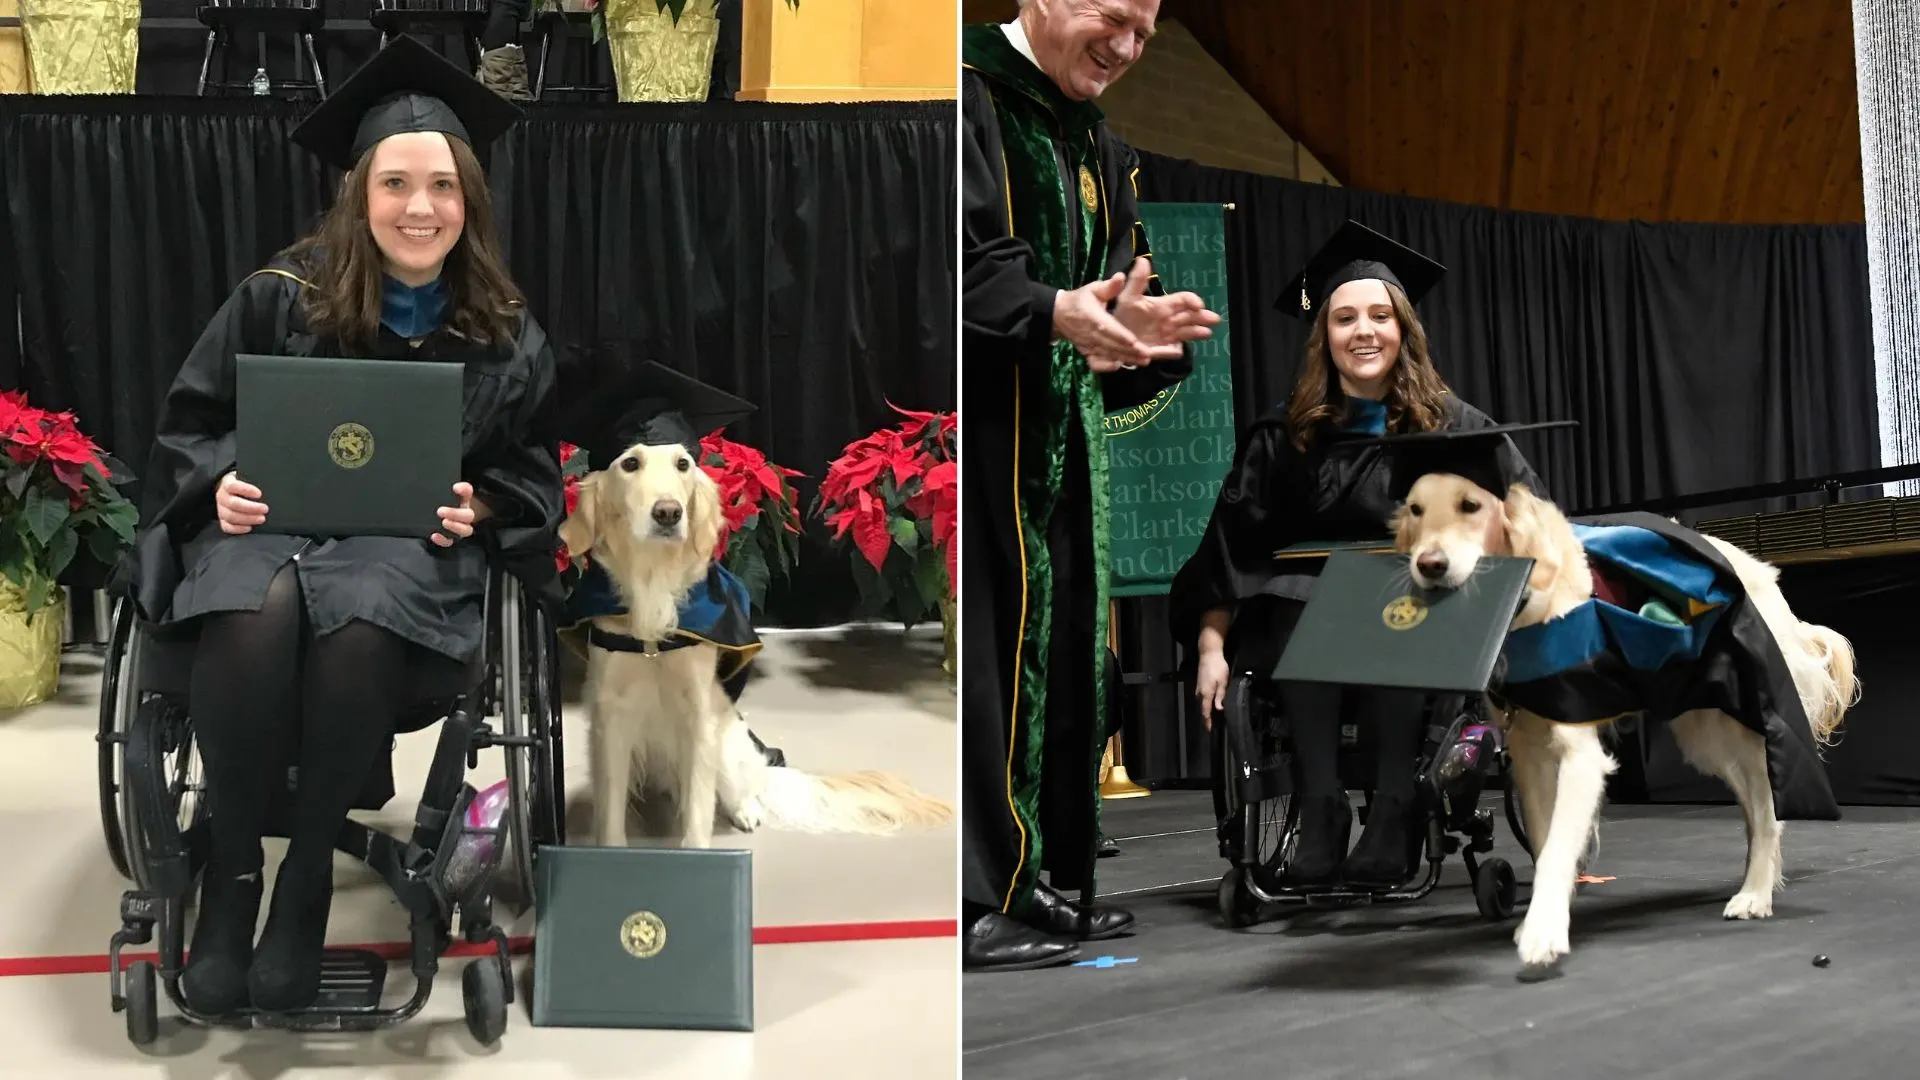 Service Golden Retriever Gets Honorary Diploma Alongside His Owner